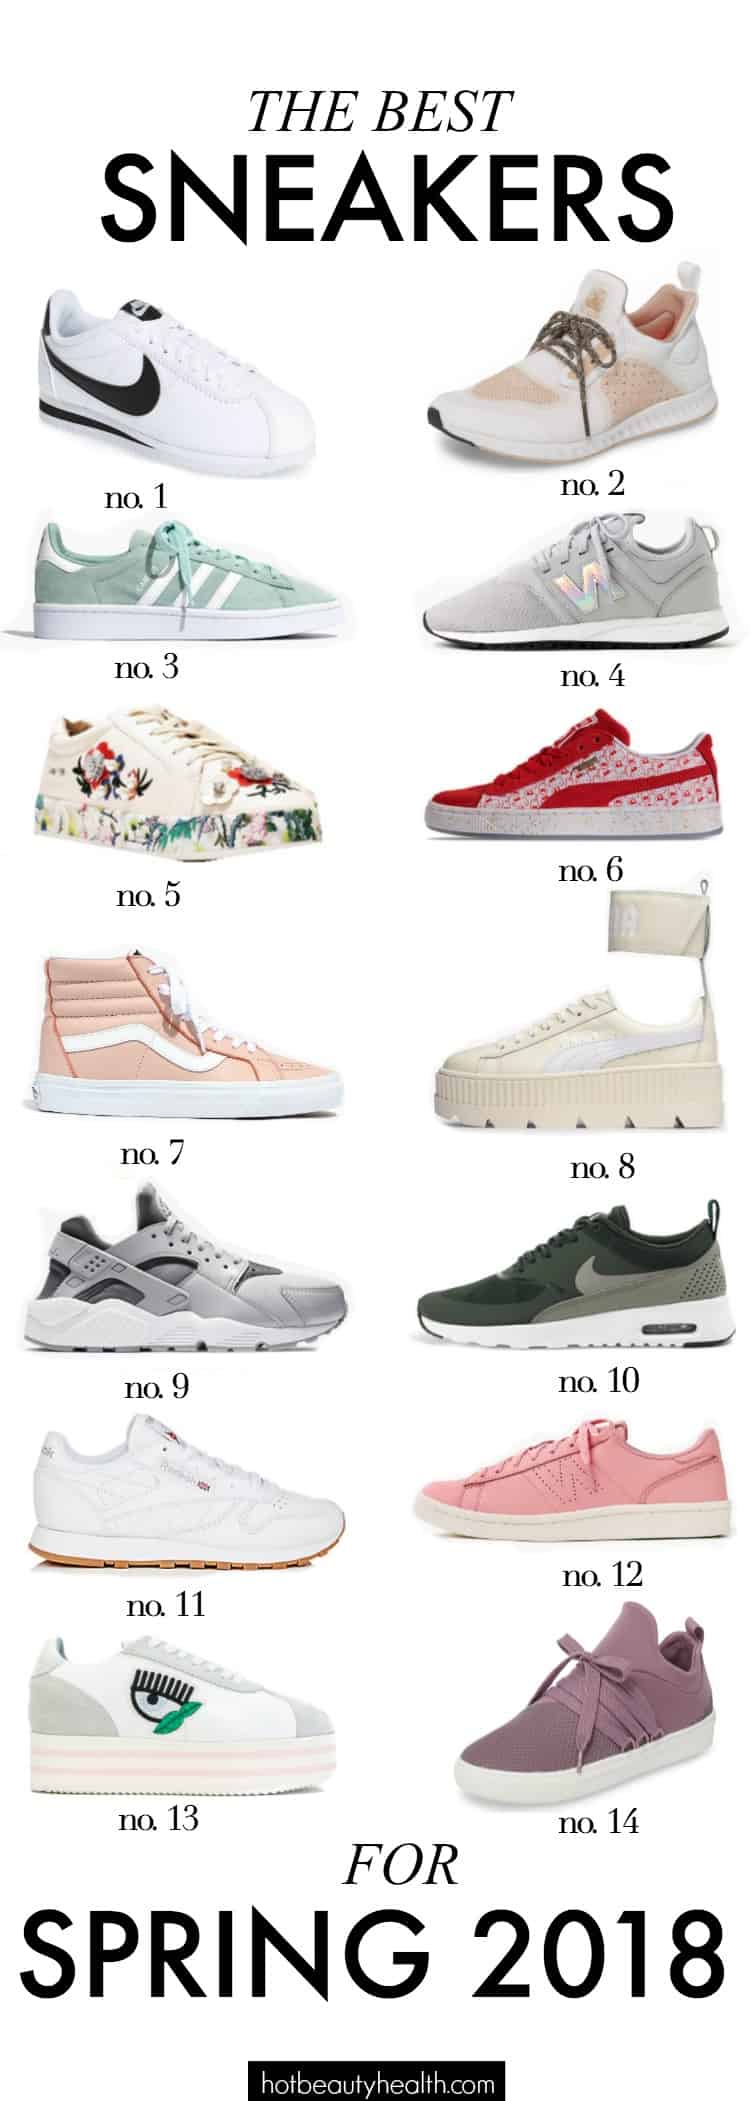 Best Sneakers 2018 – Fashion dresses